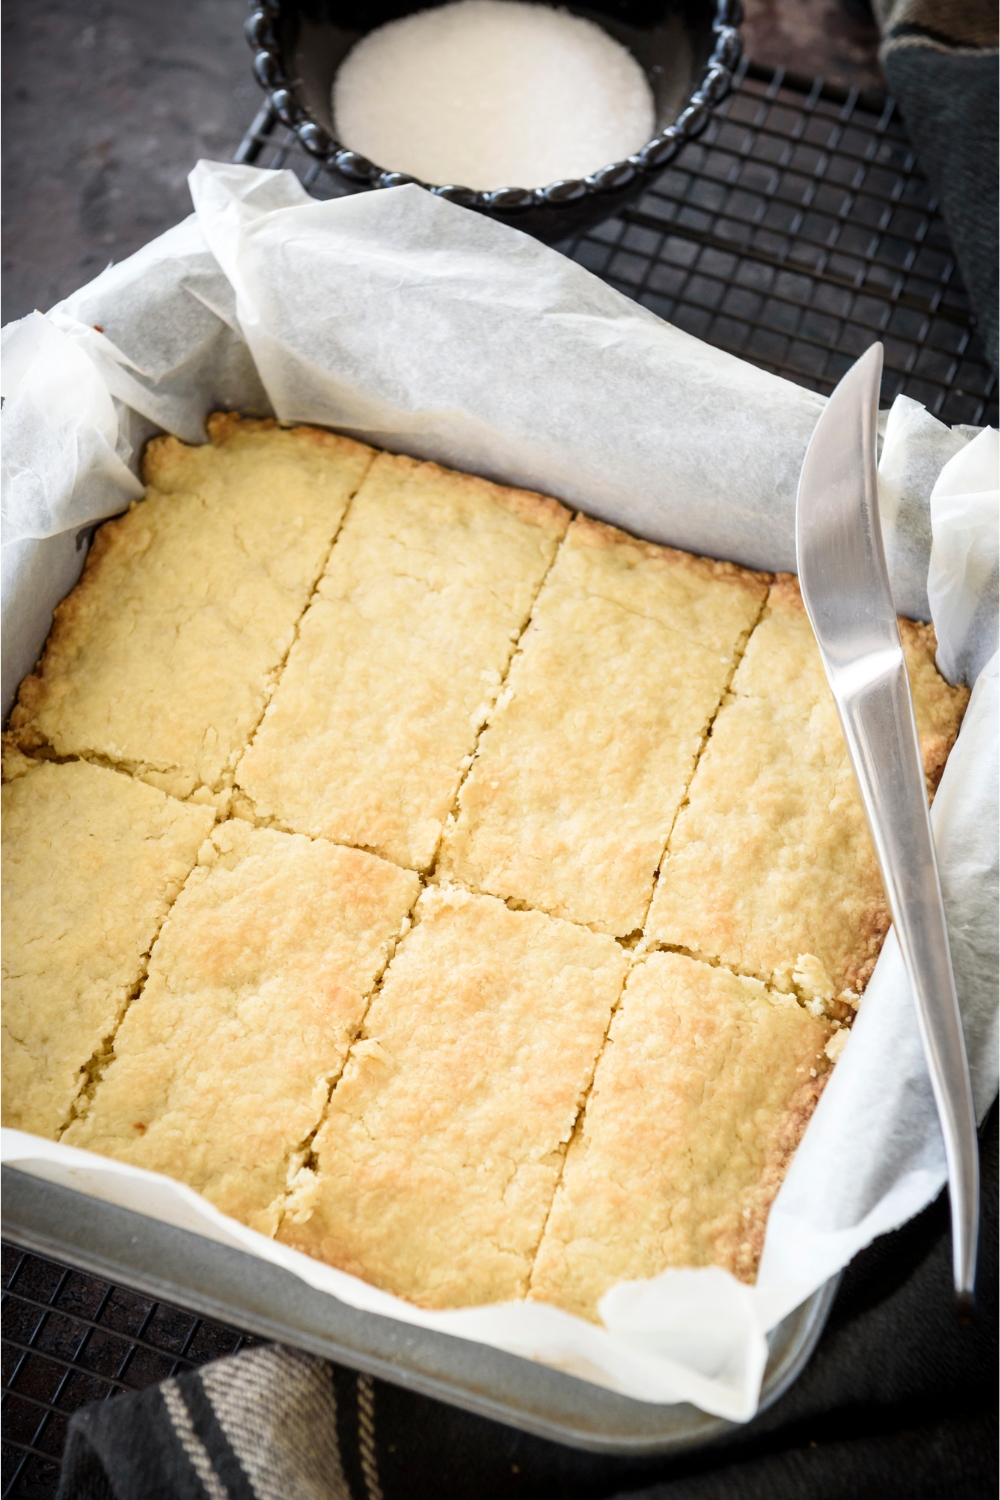 A square baking dish lined with parchment paper with freshly baked biscuits that have been cut into rectangles using a knife.